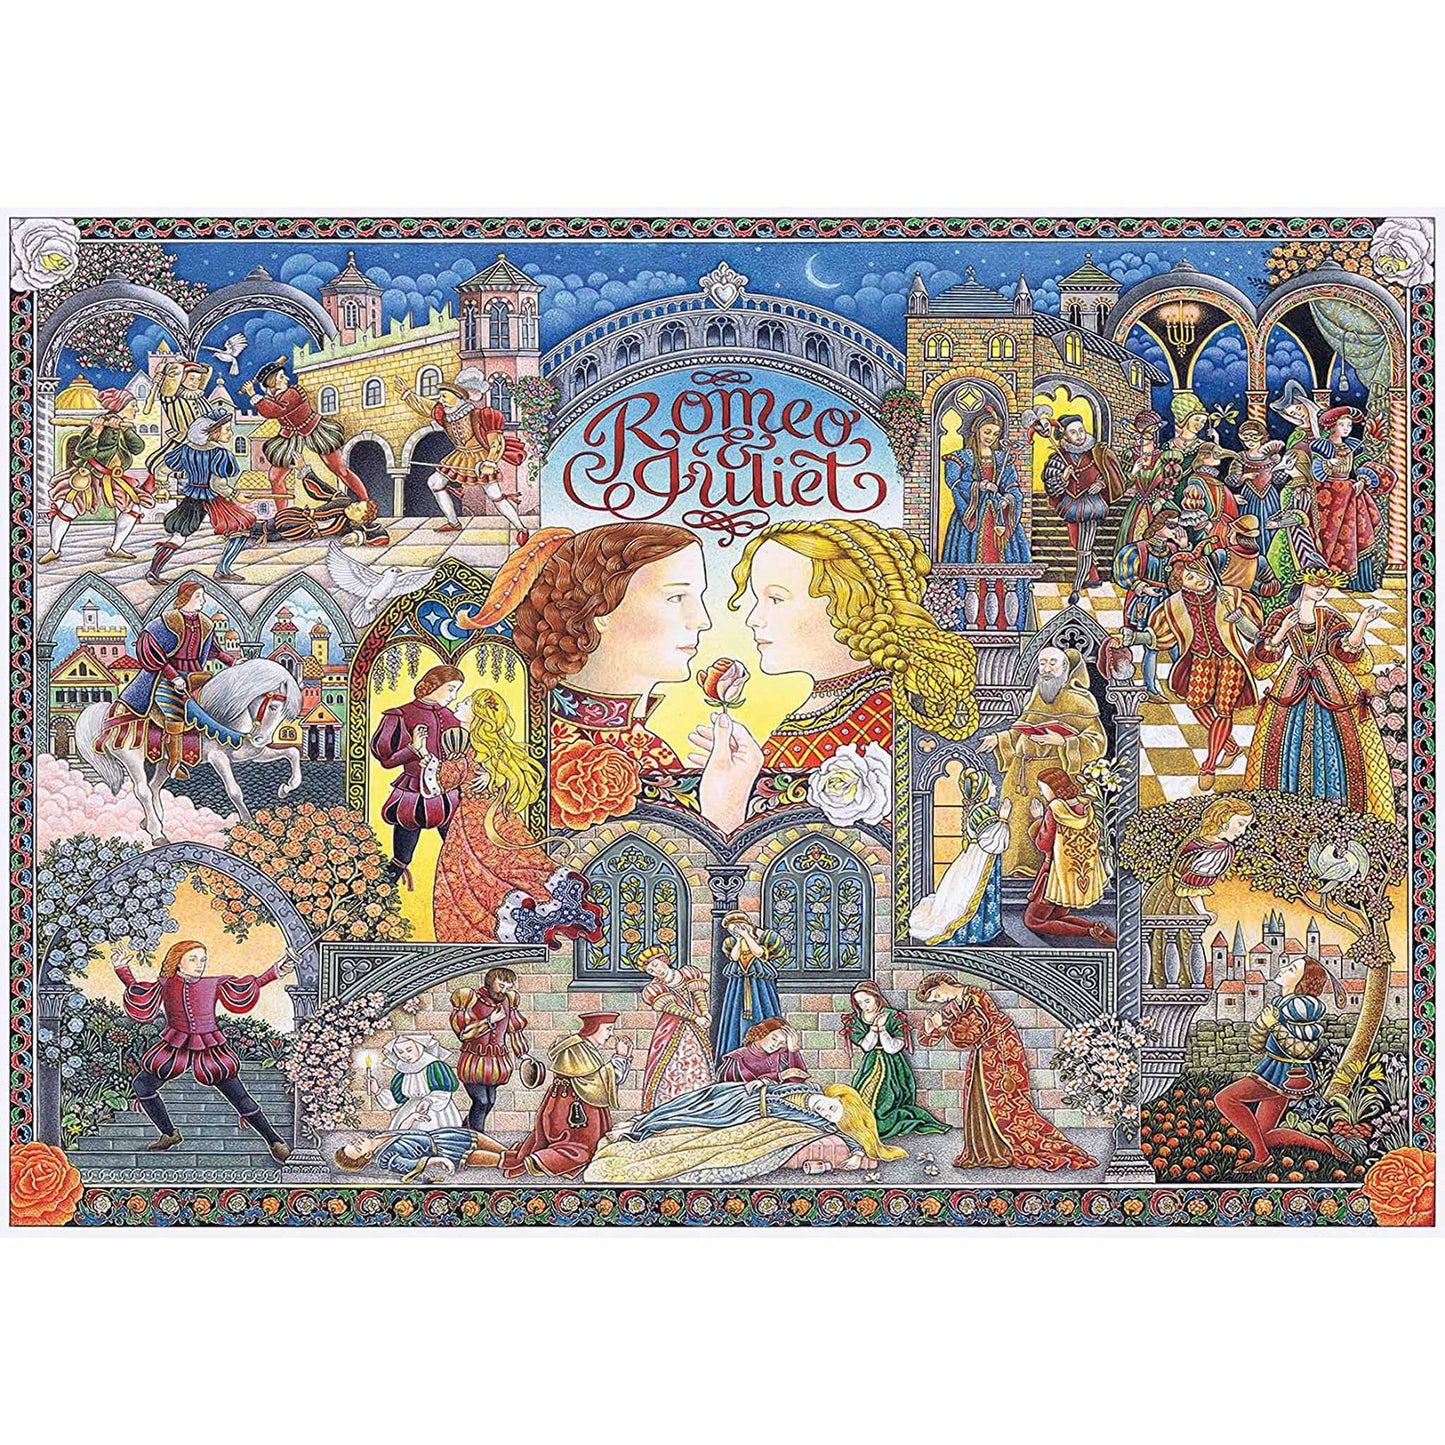 Image of Romeo and Juliet Ravensburger puzzle.